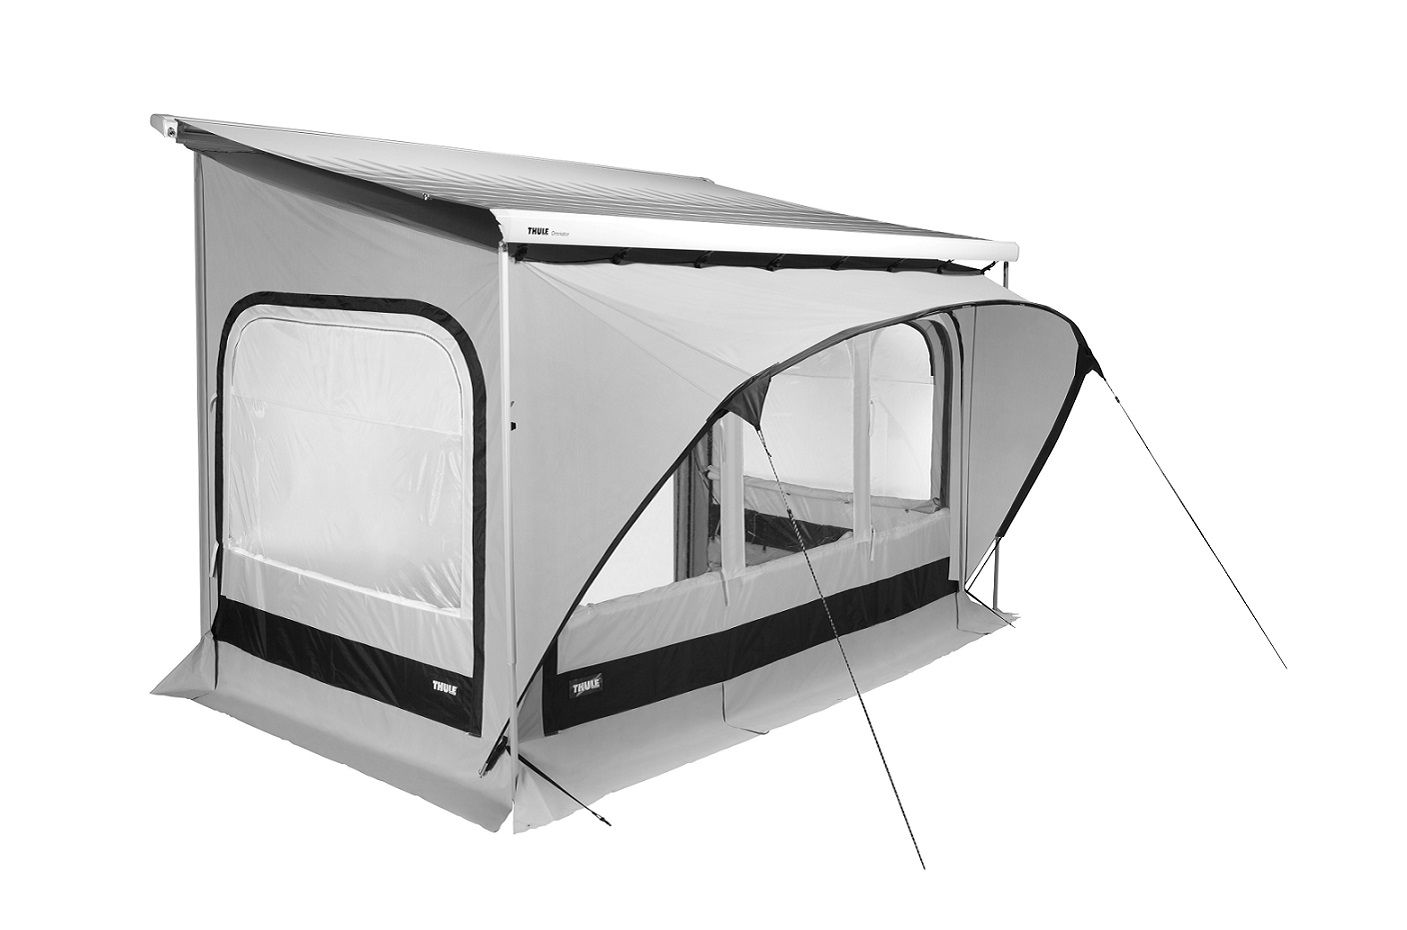 Thule QuickFit Awning Tent Ducato H2 black/gray/white